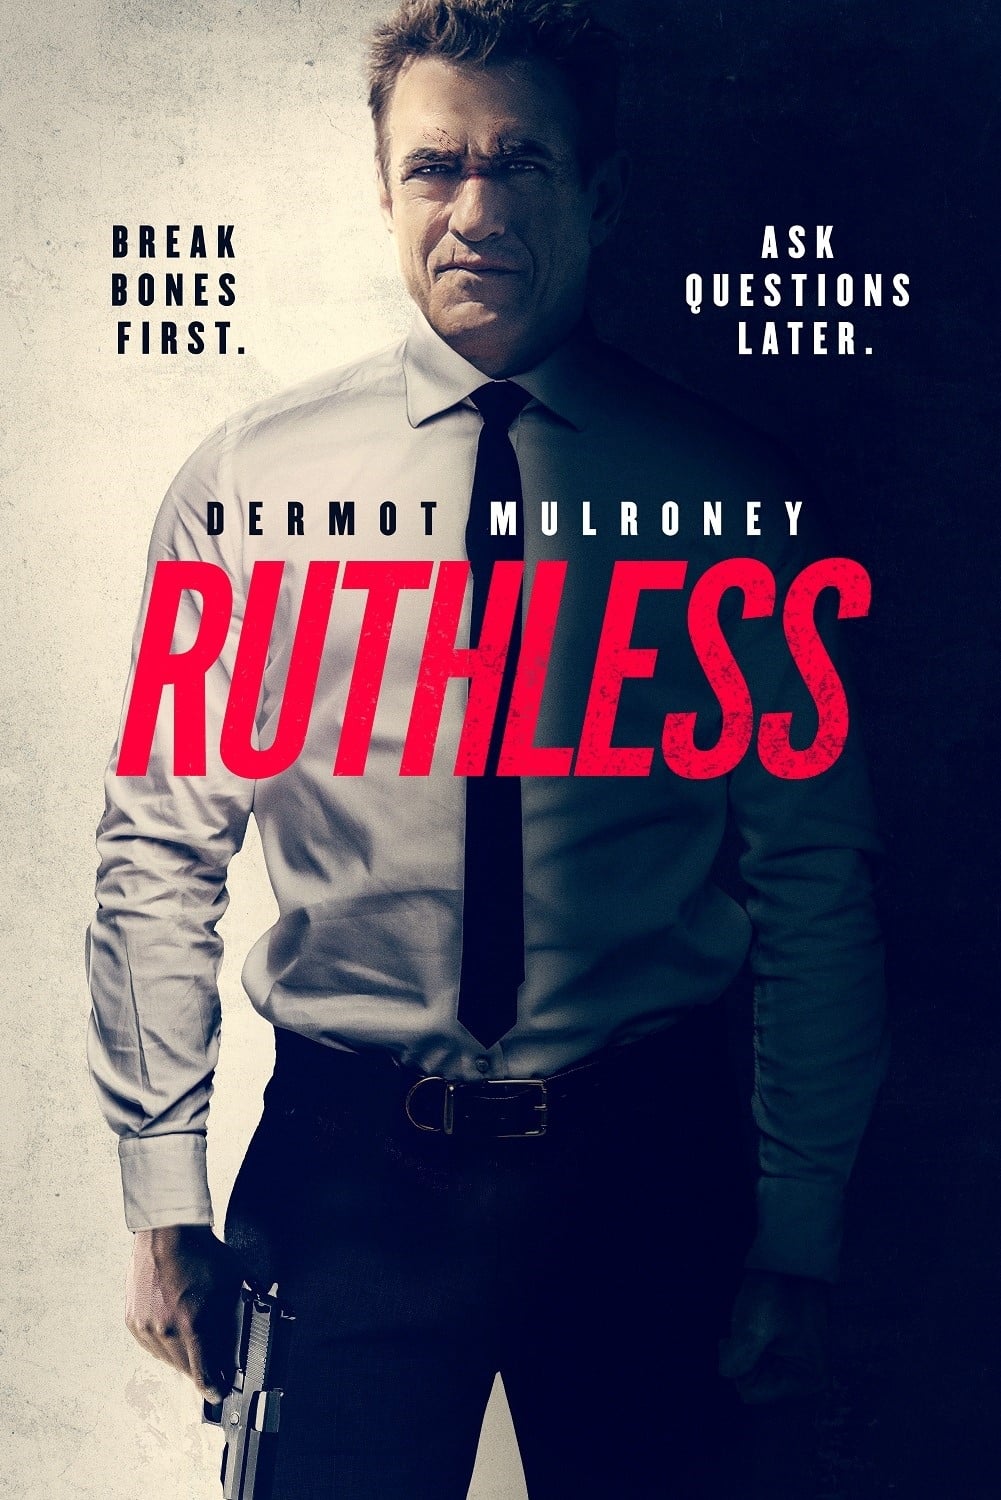 Poster for the movie "Ruthless"